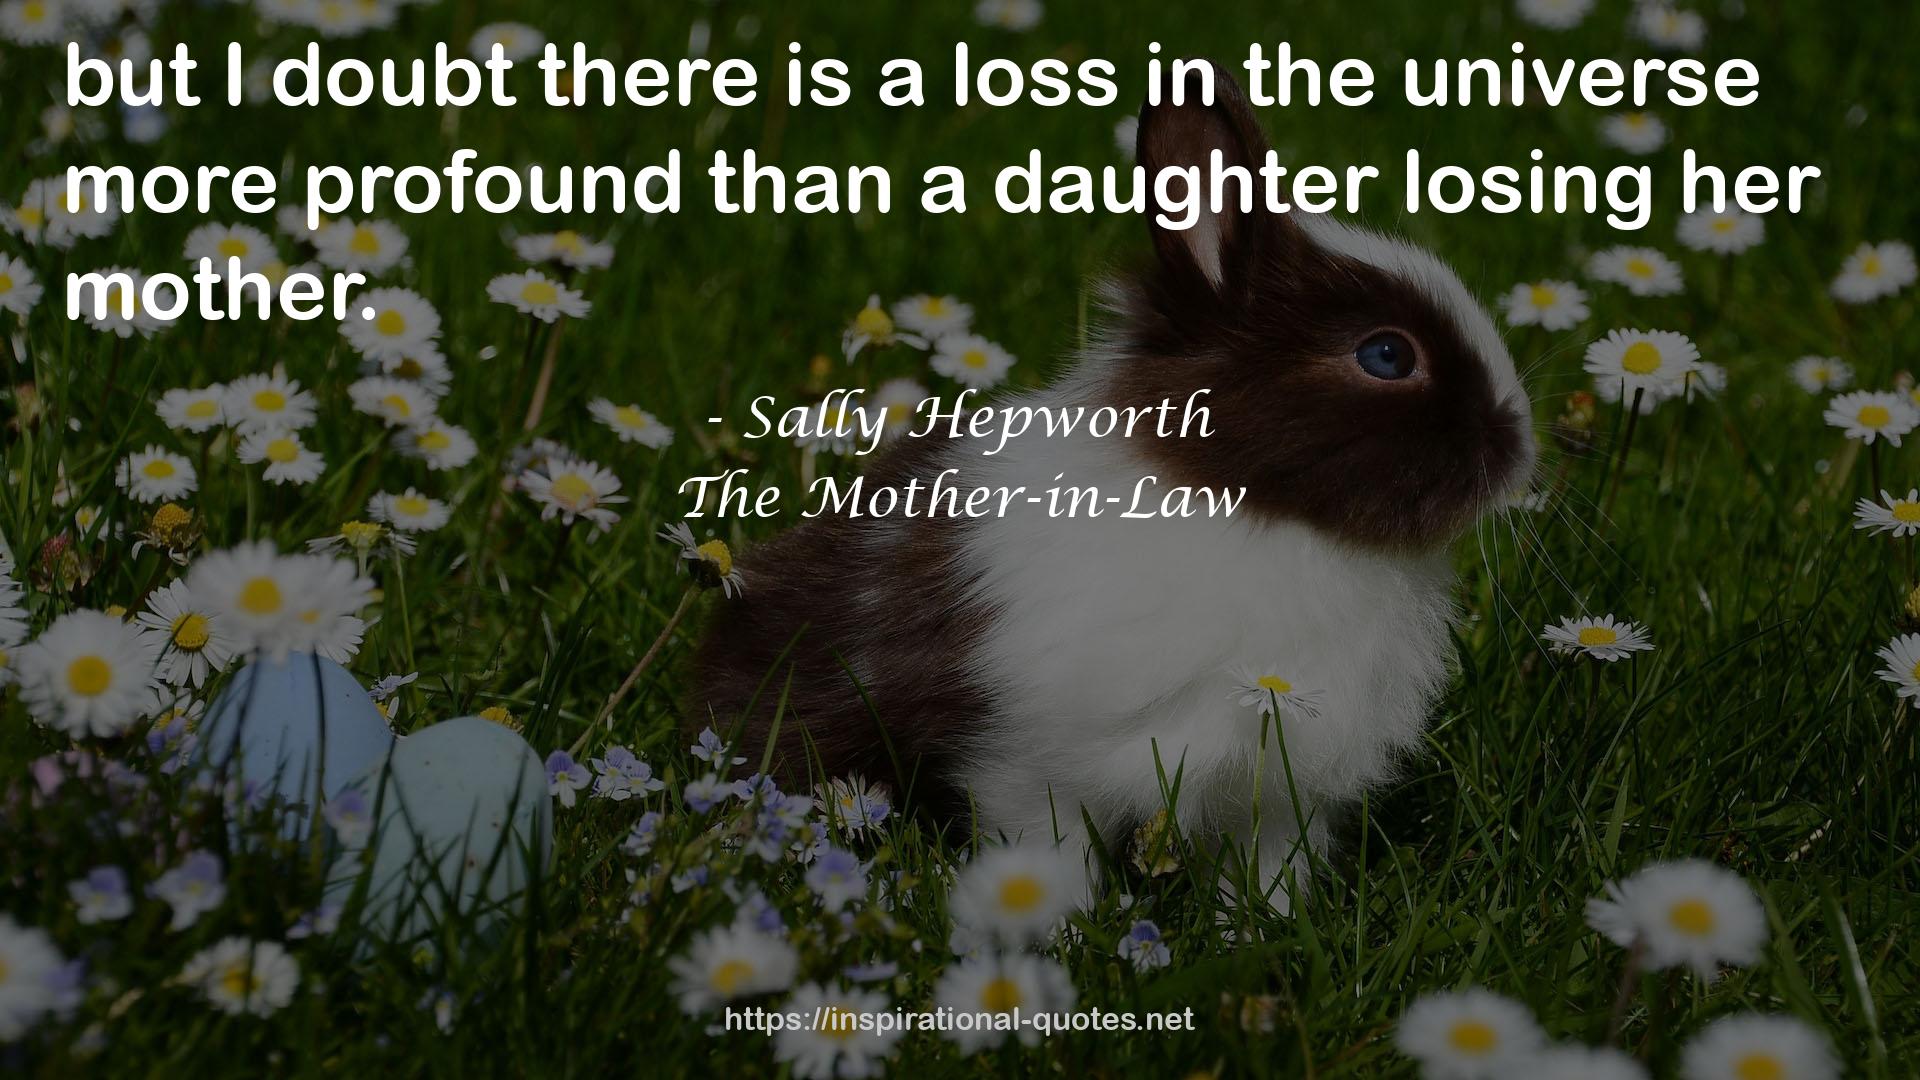 The Mother-in-Law QUOTES